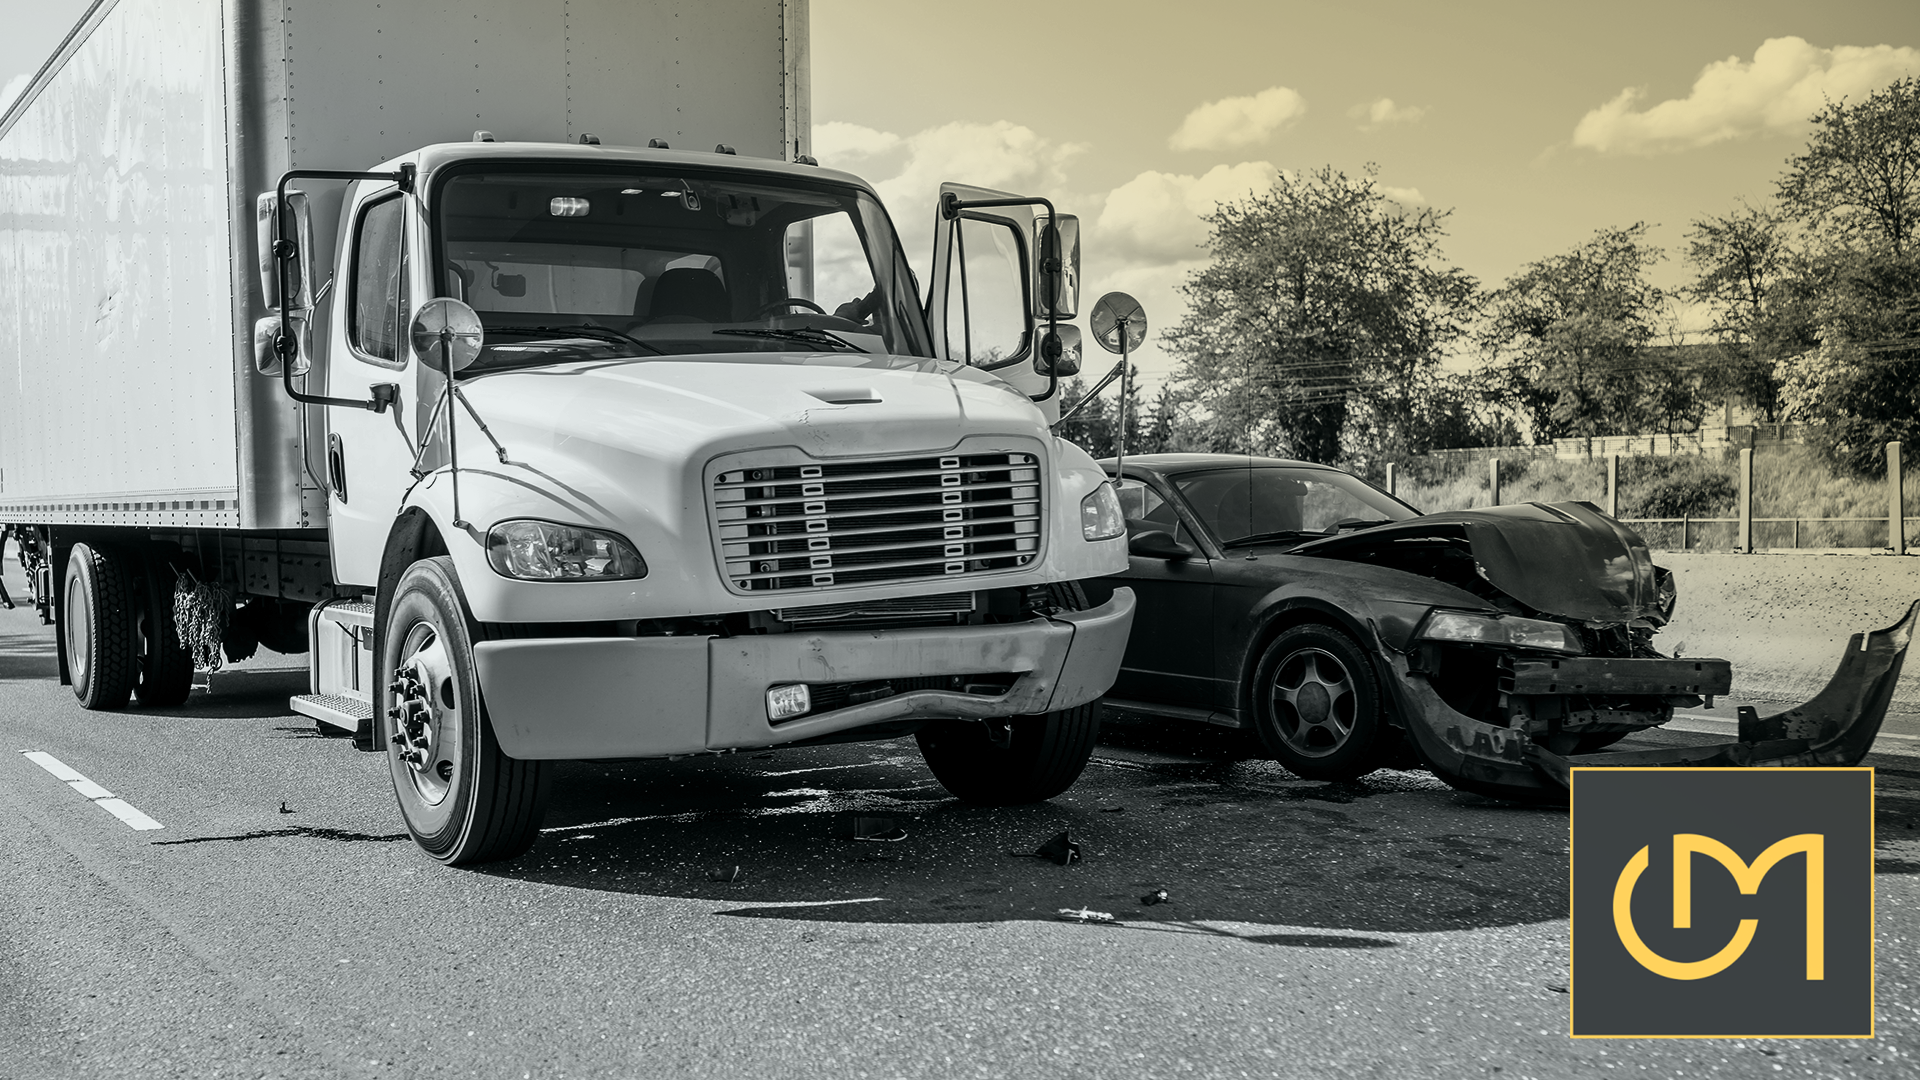 Miami Truck Accident Lawyer